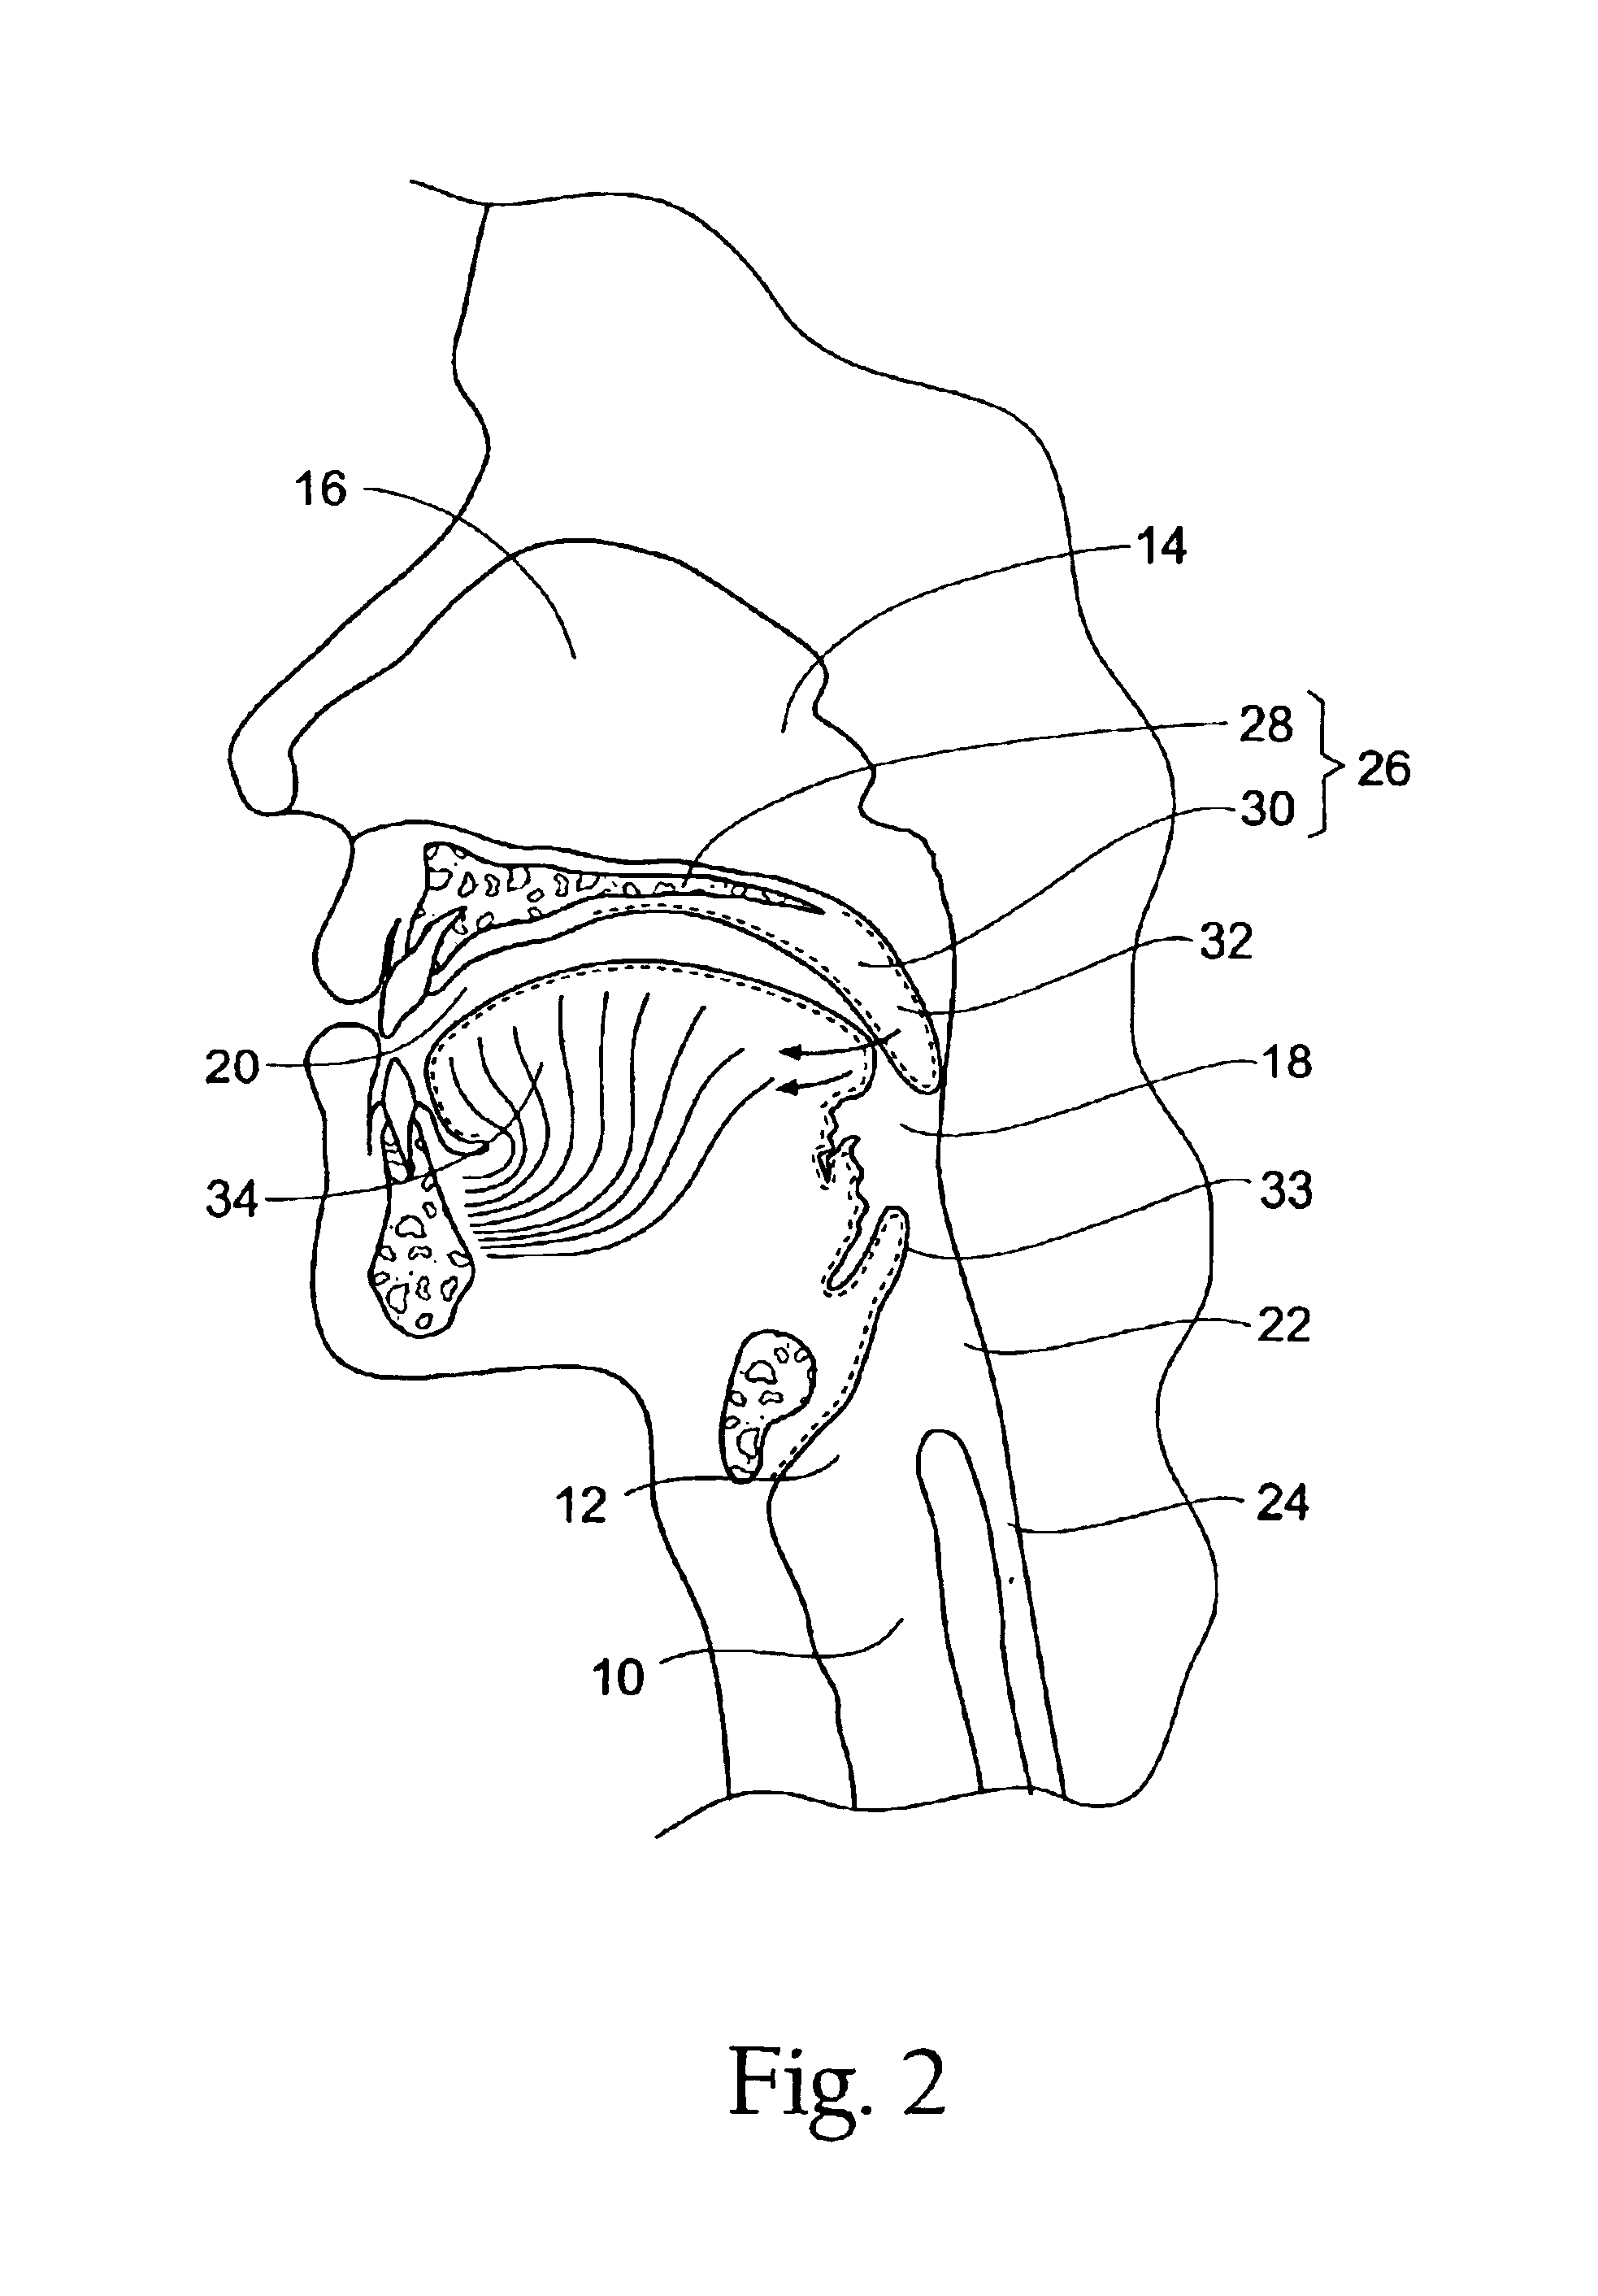 Systems and methods for moving and/or restraining the tongue in the oral cavity